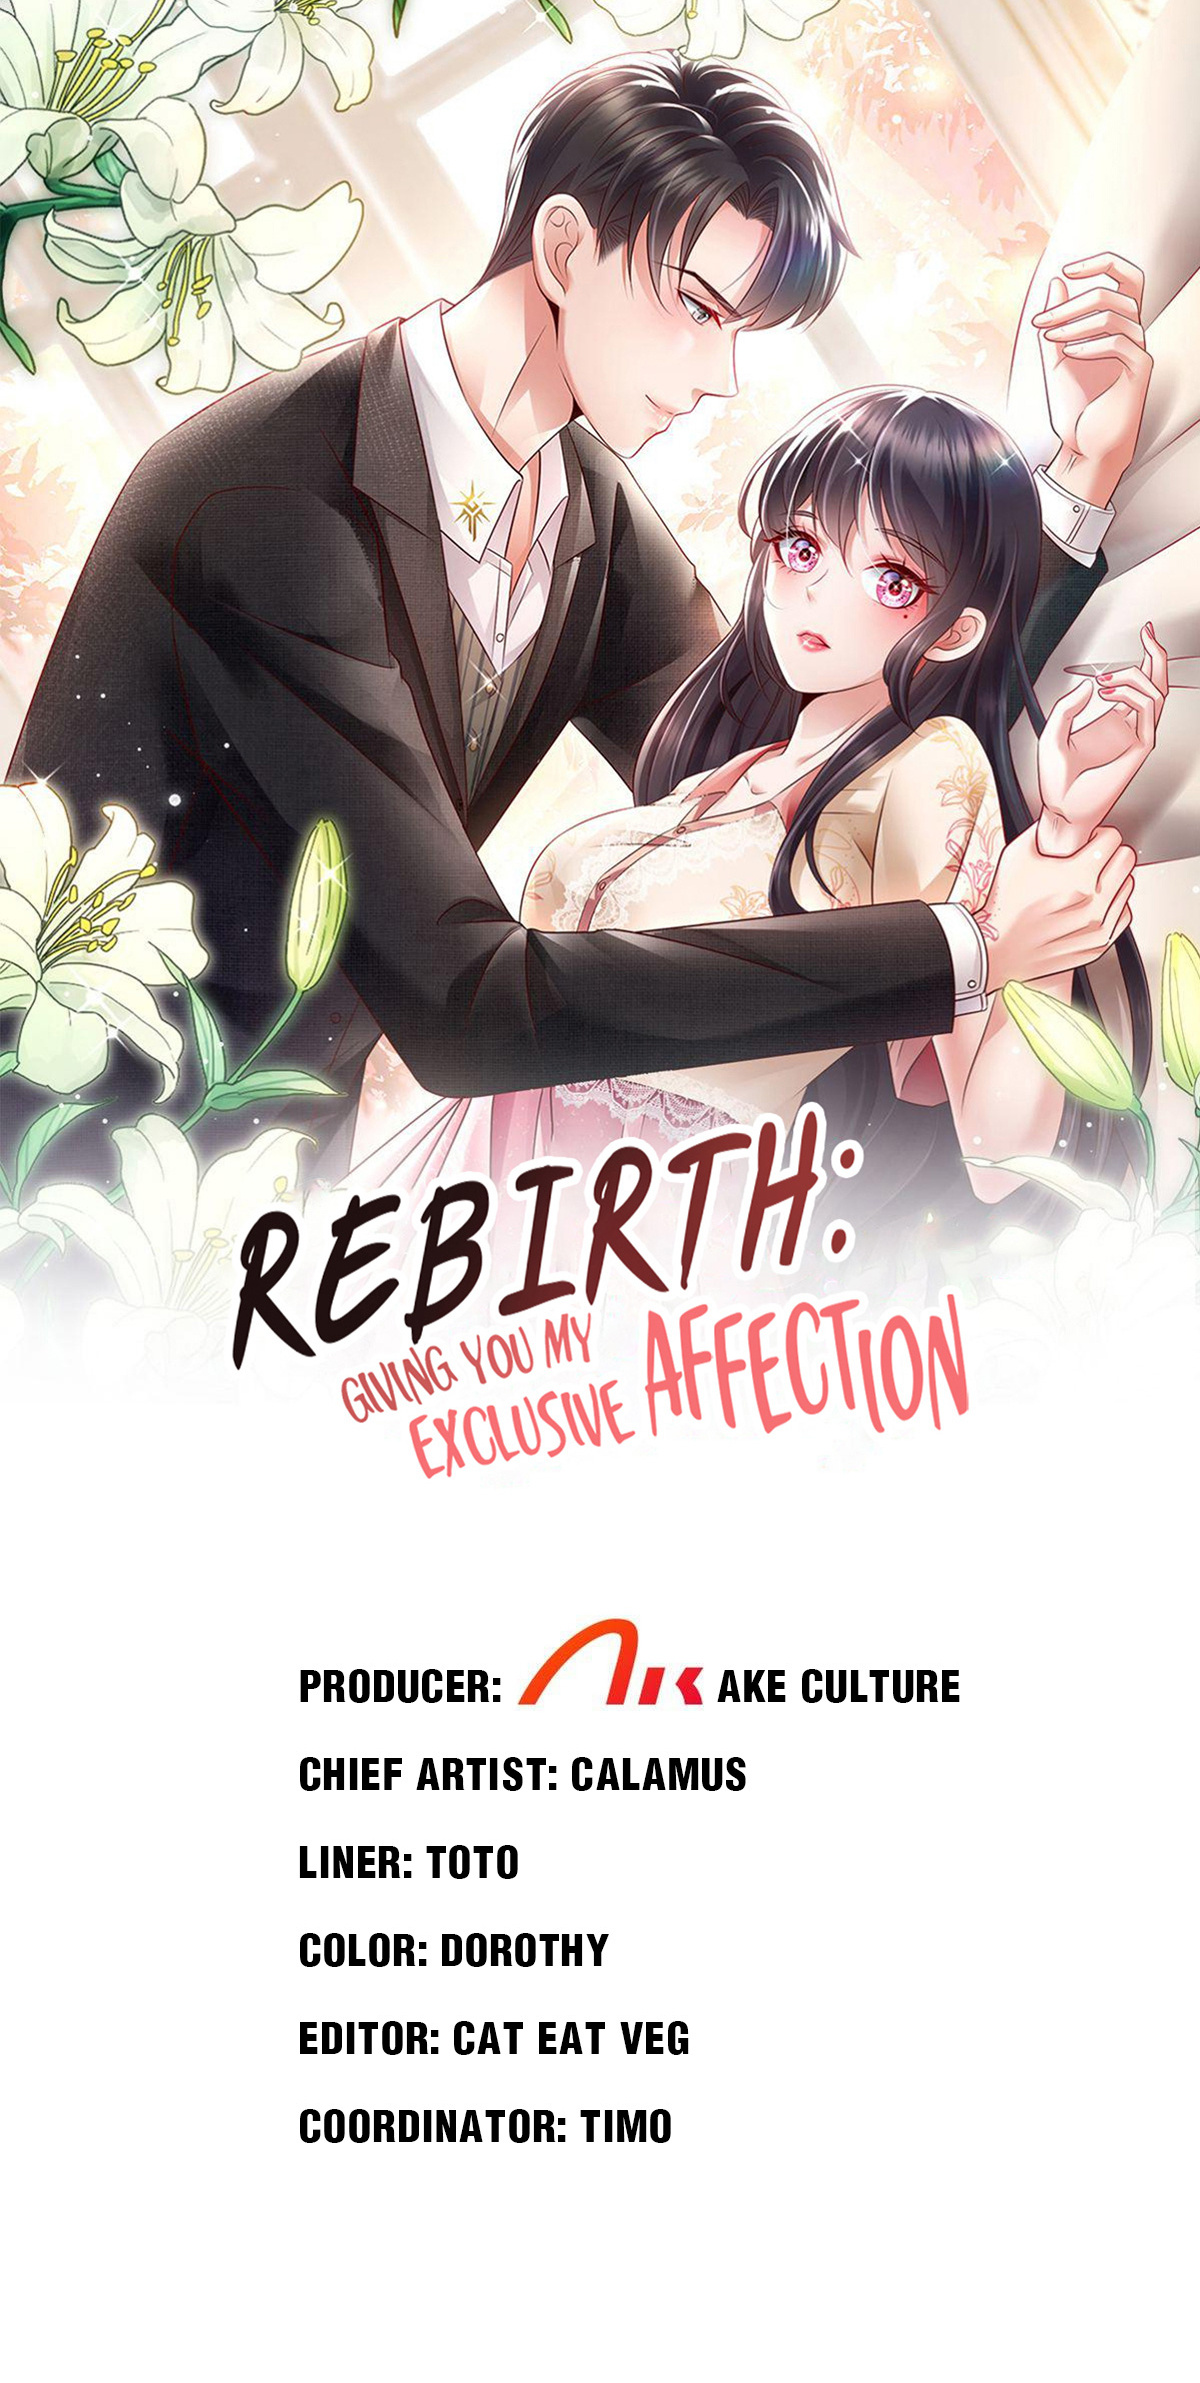 Rebirth: Giving You My Exclusive Affection 250